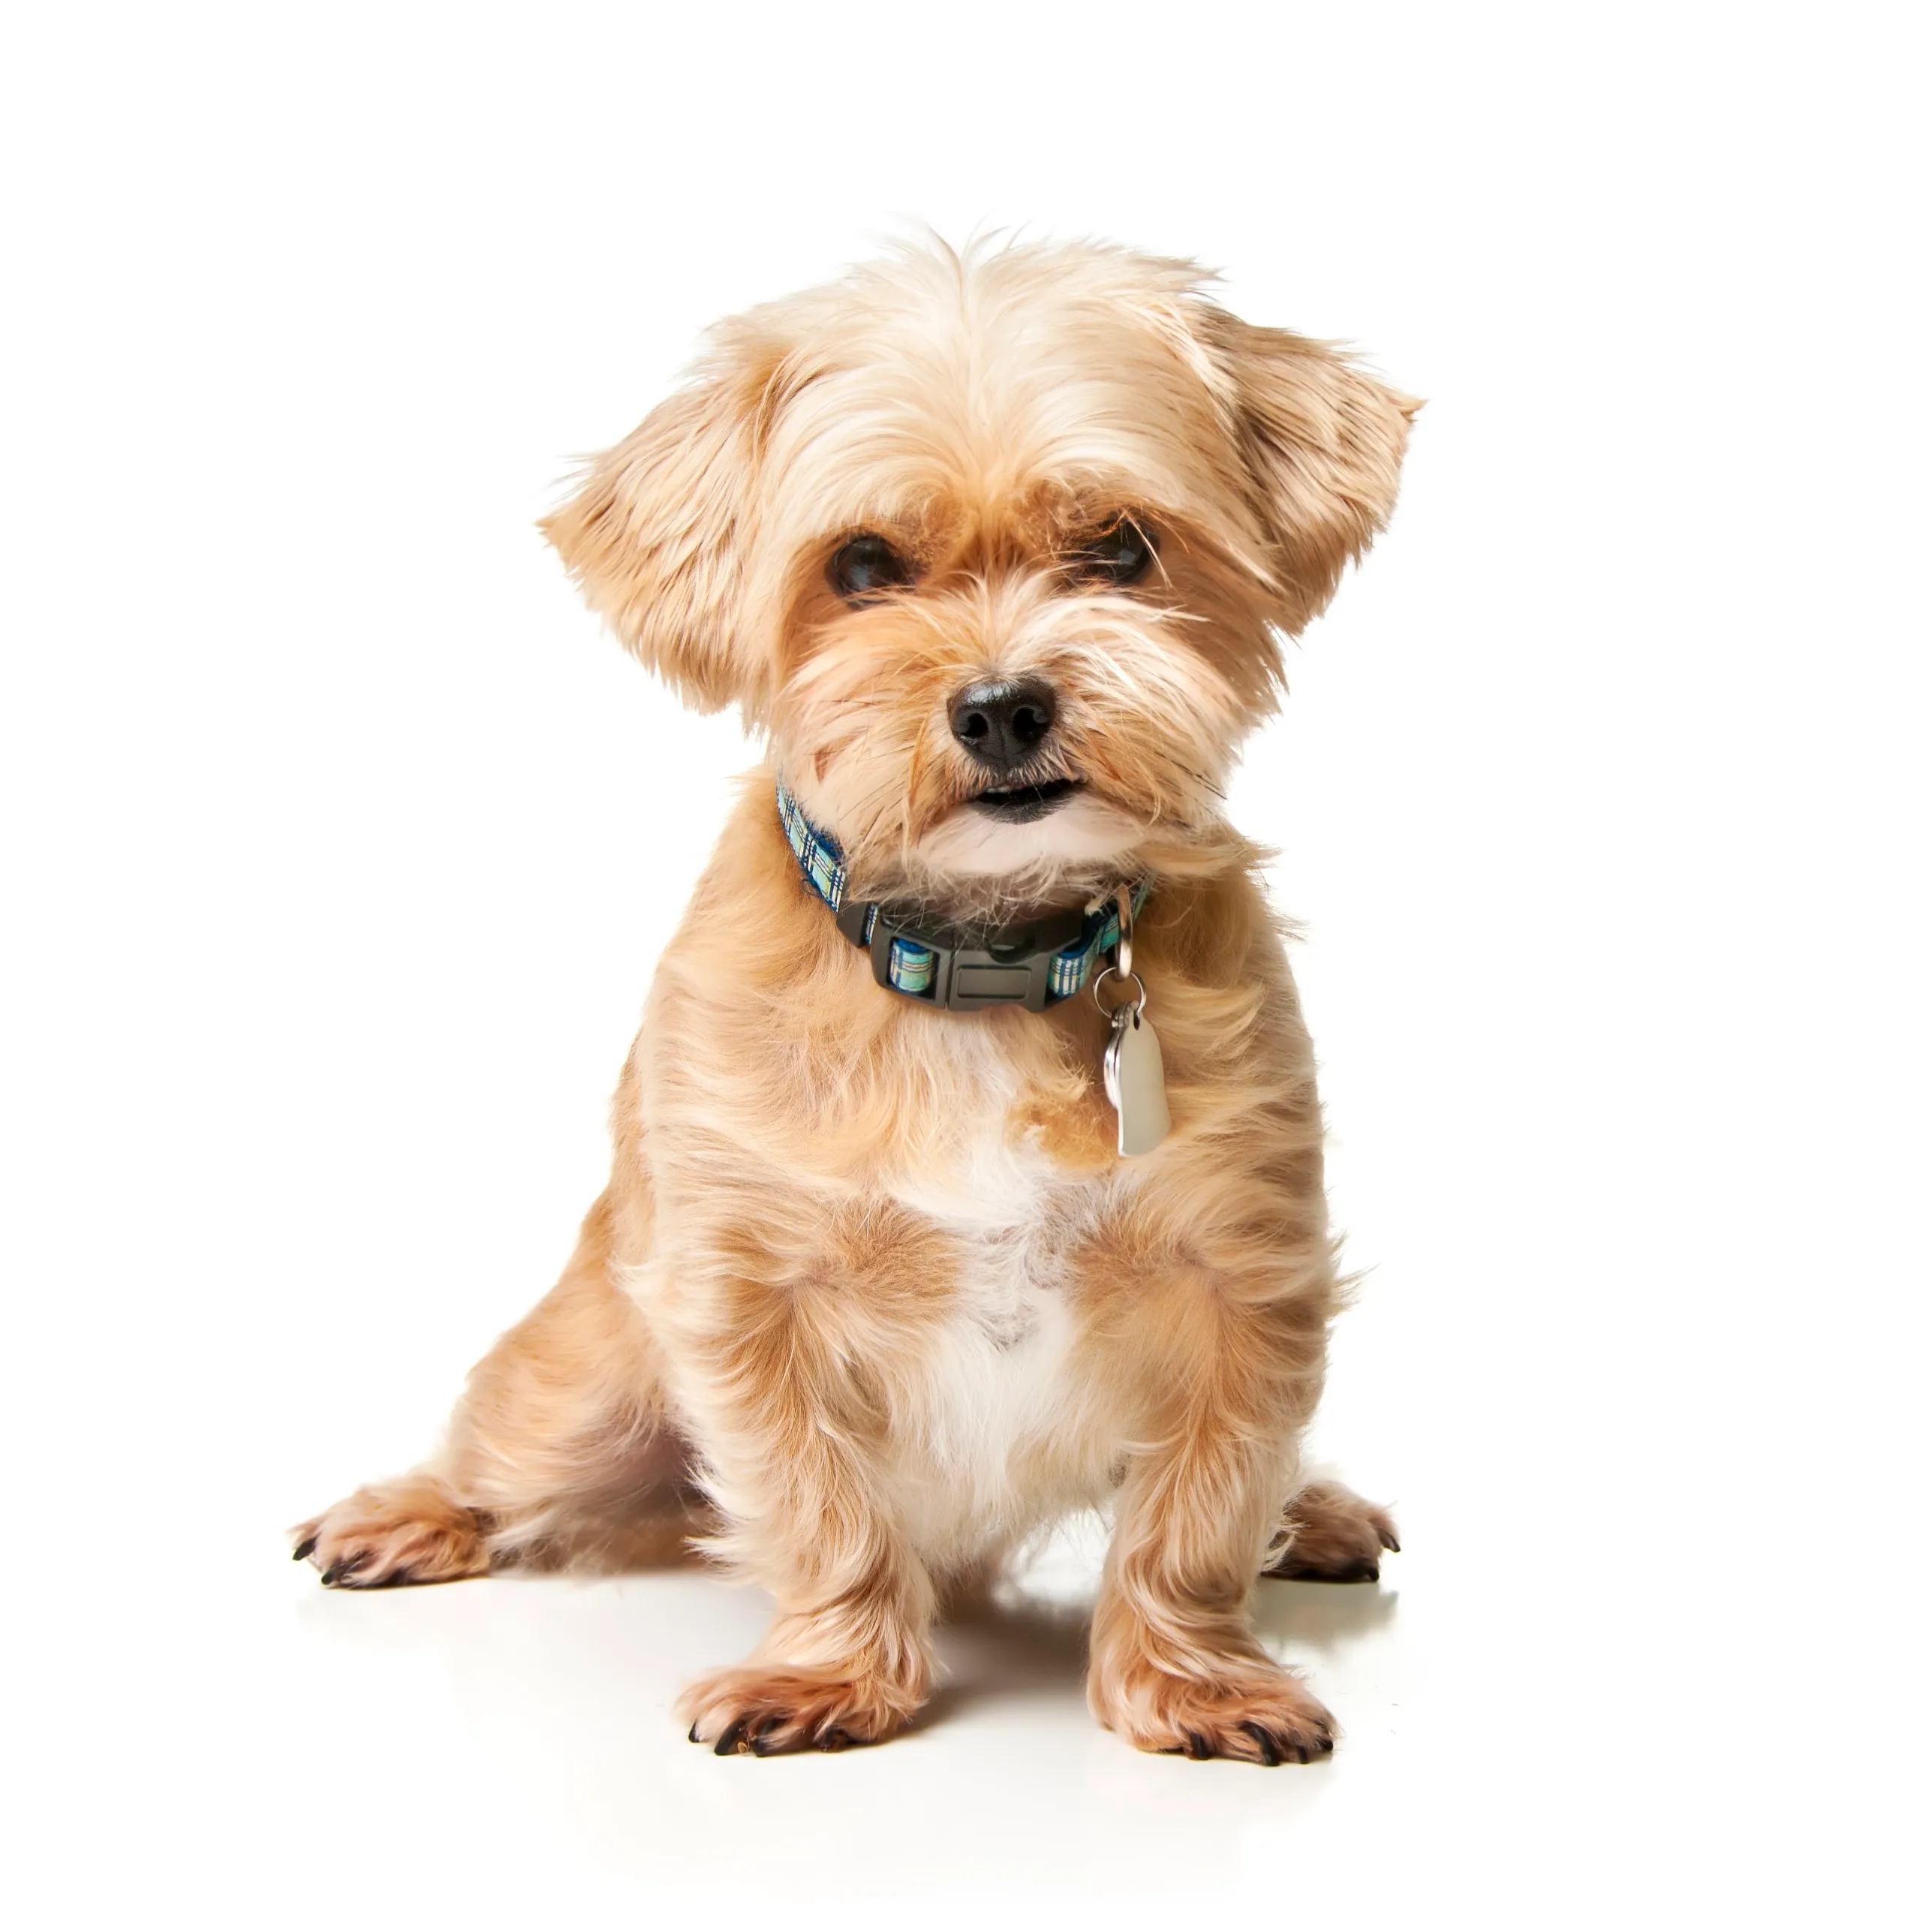 Shorkie Mixed Dog Breed Pictures 1 